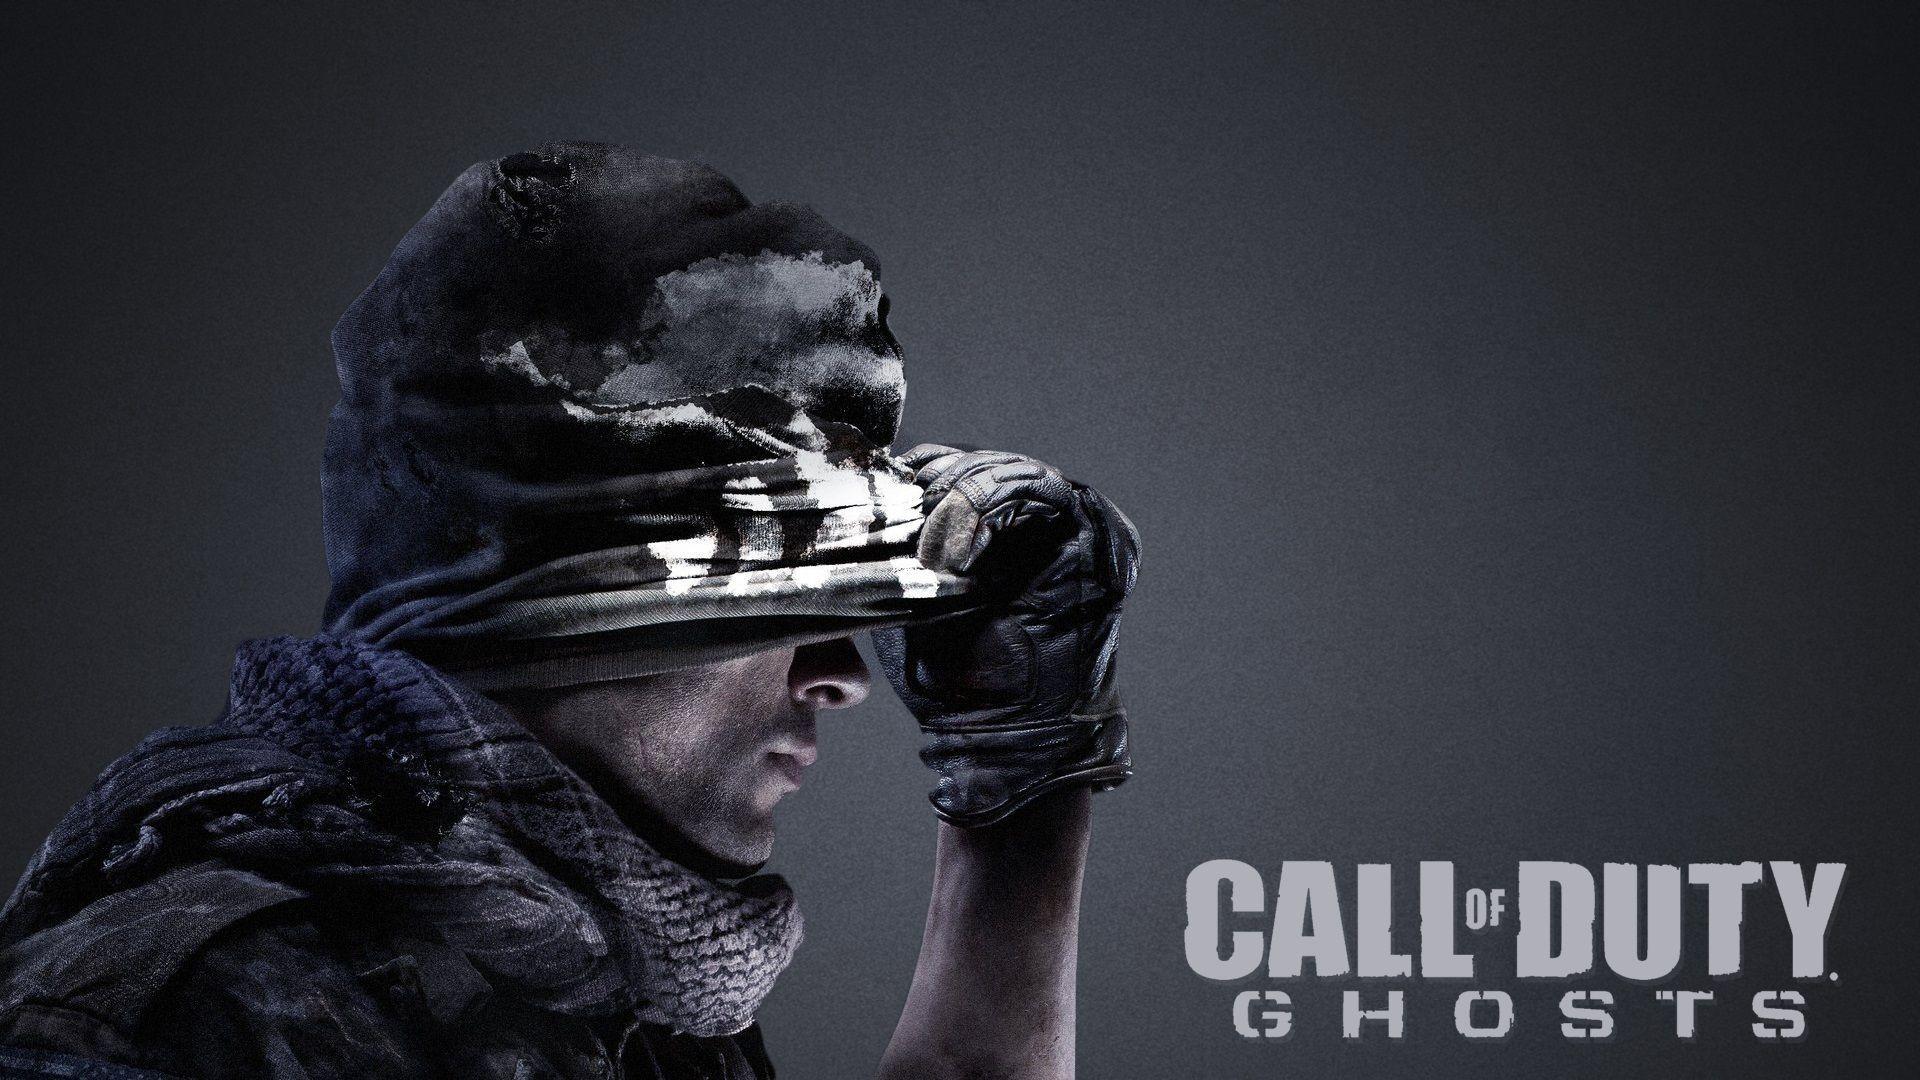 Call Of Duty: Ghosts Wallpapers - Wallpaper Cave